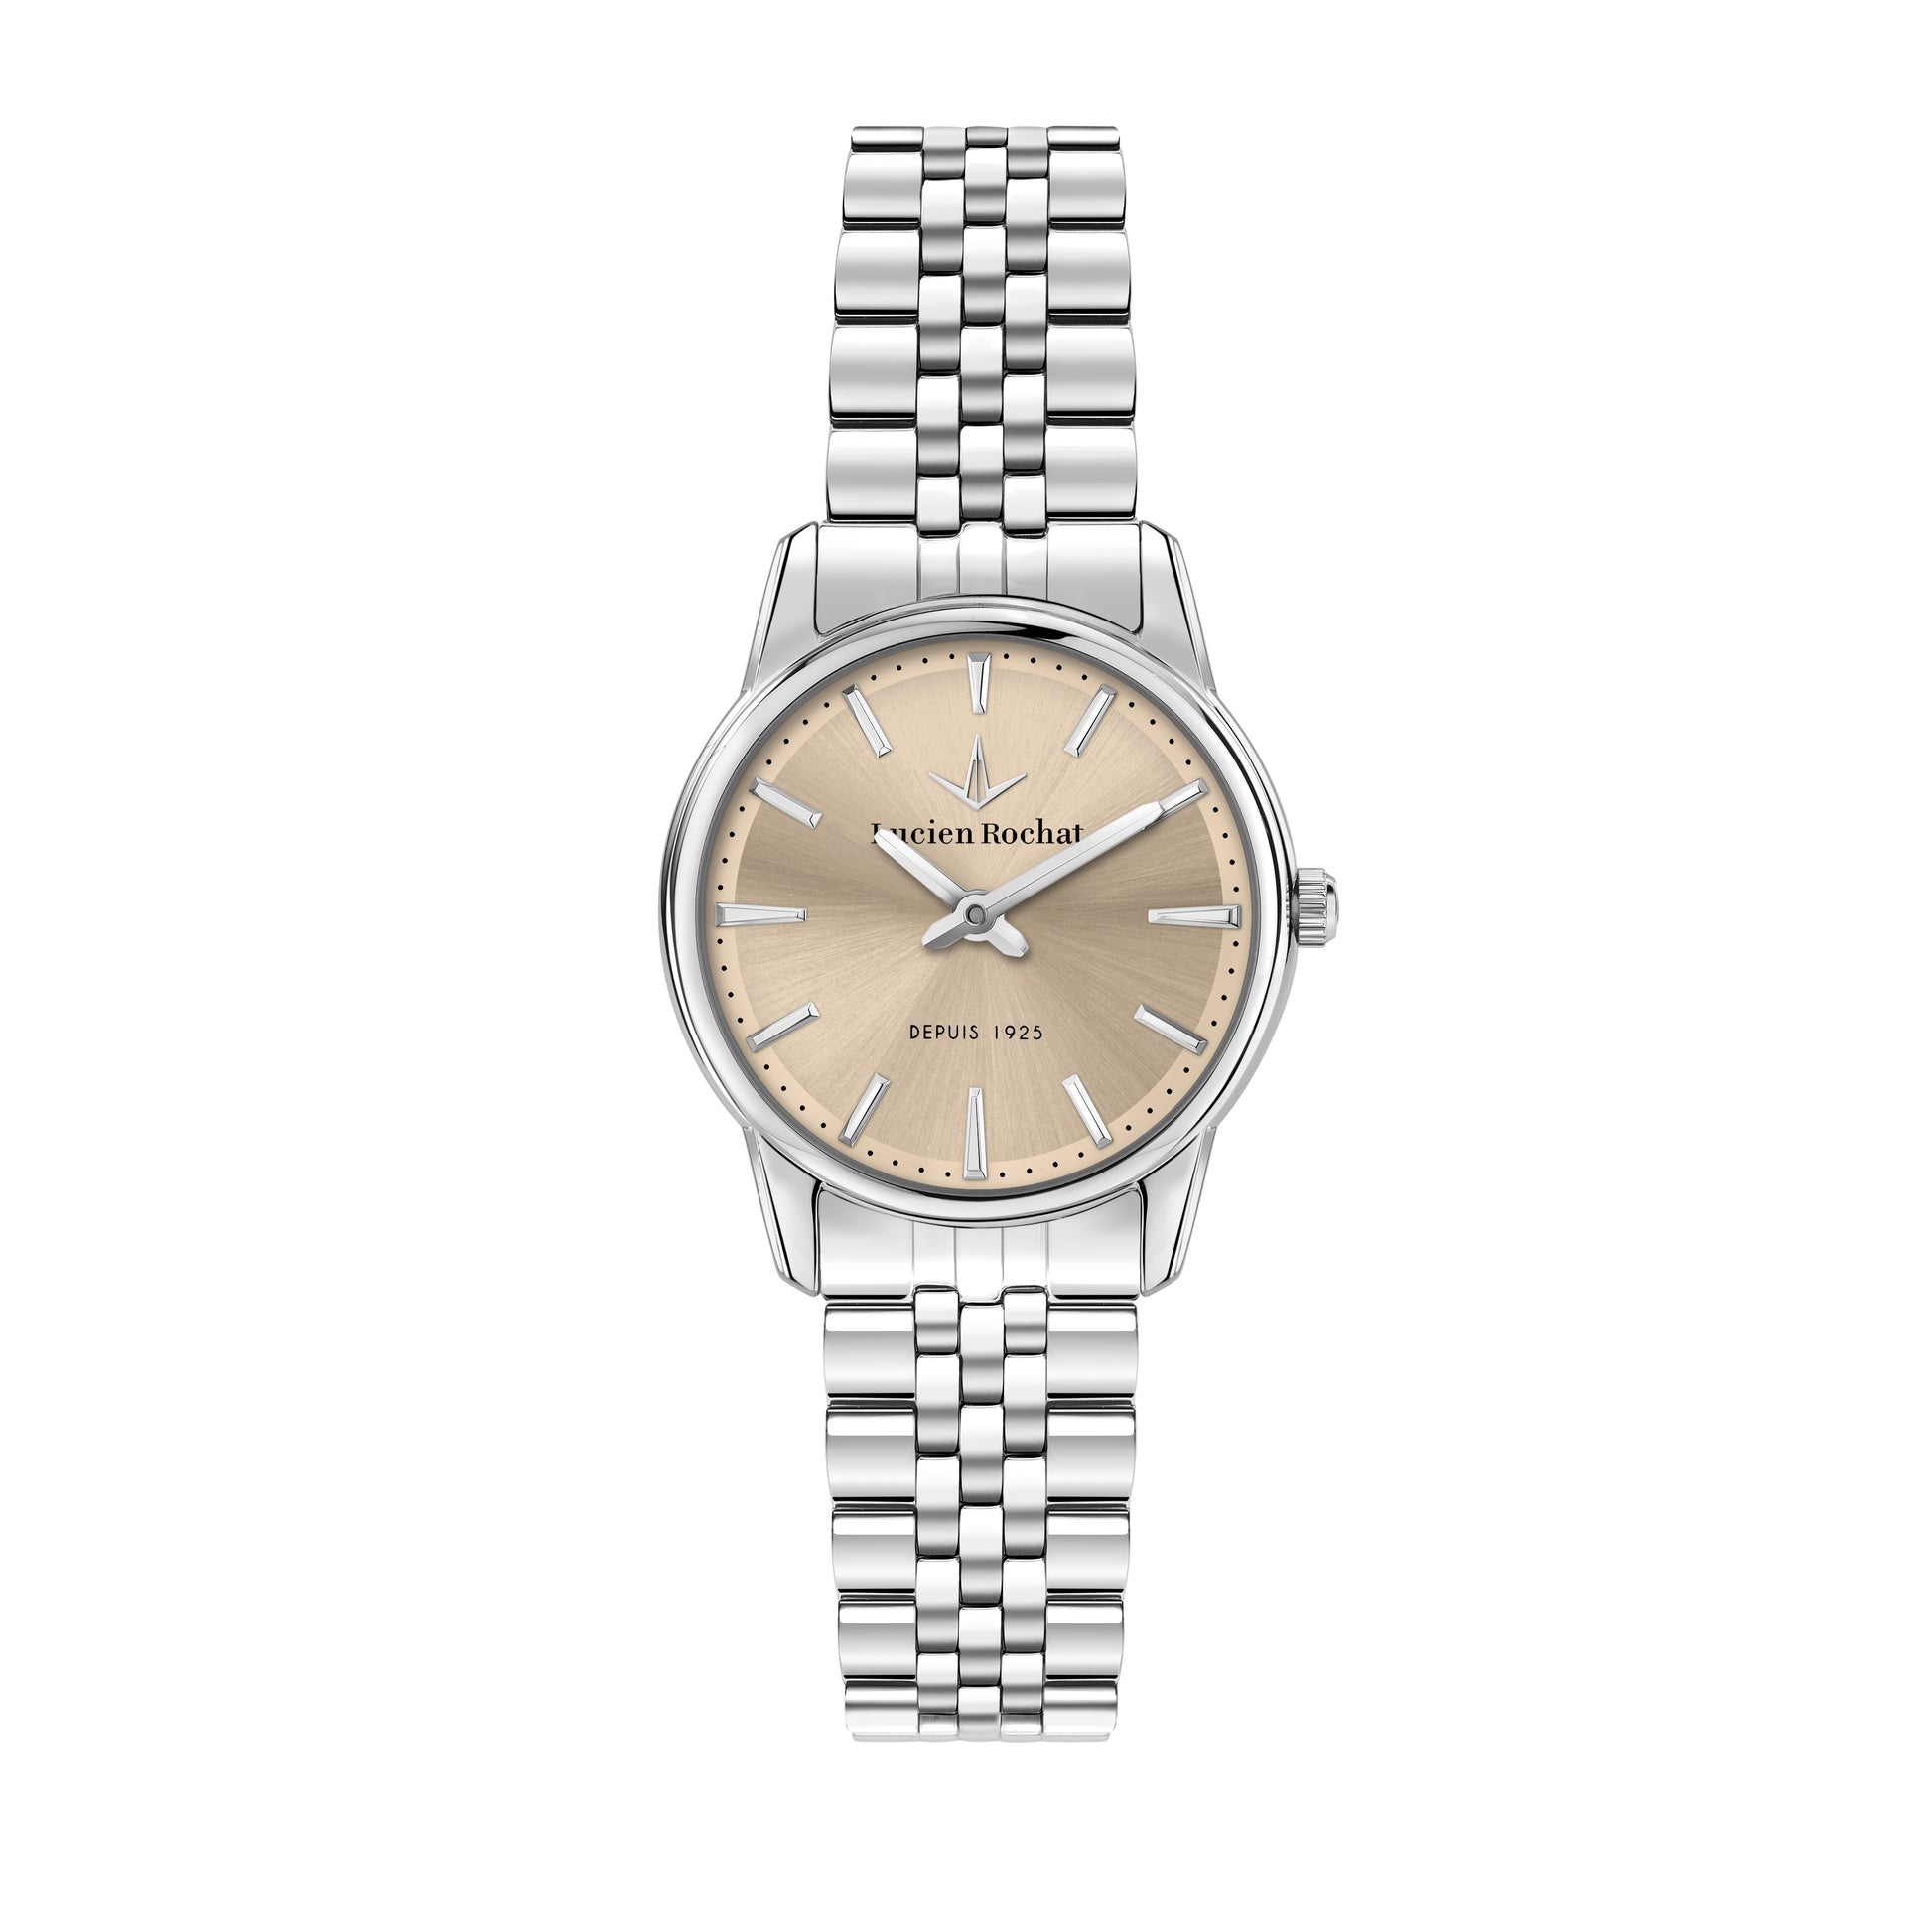 orologio donna lucien rochat iconic r0453116505